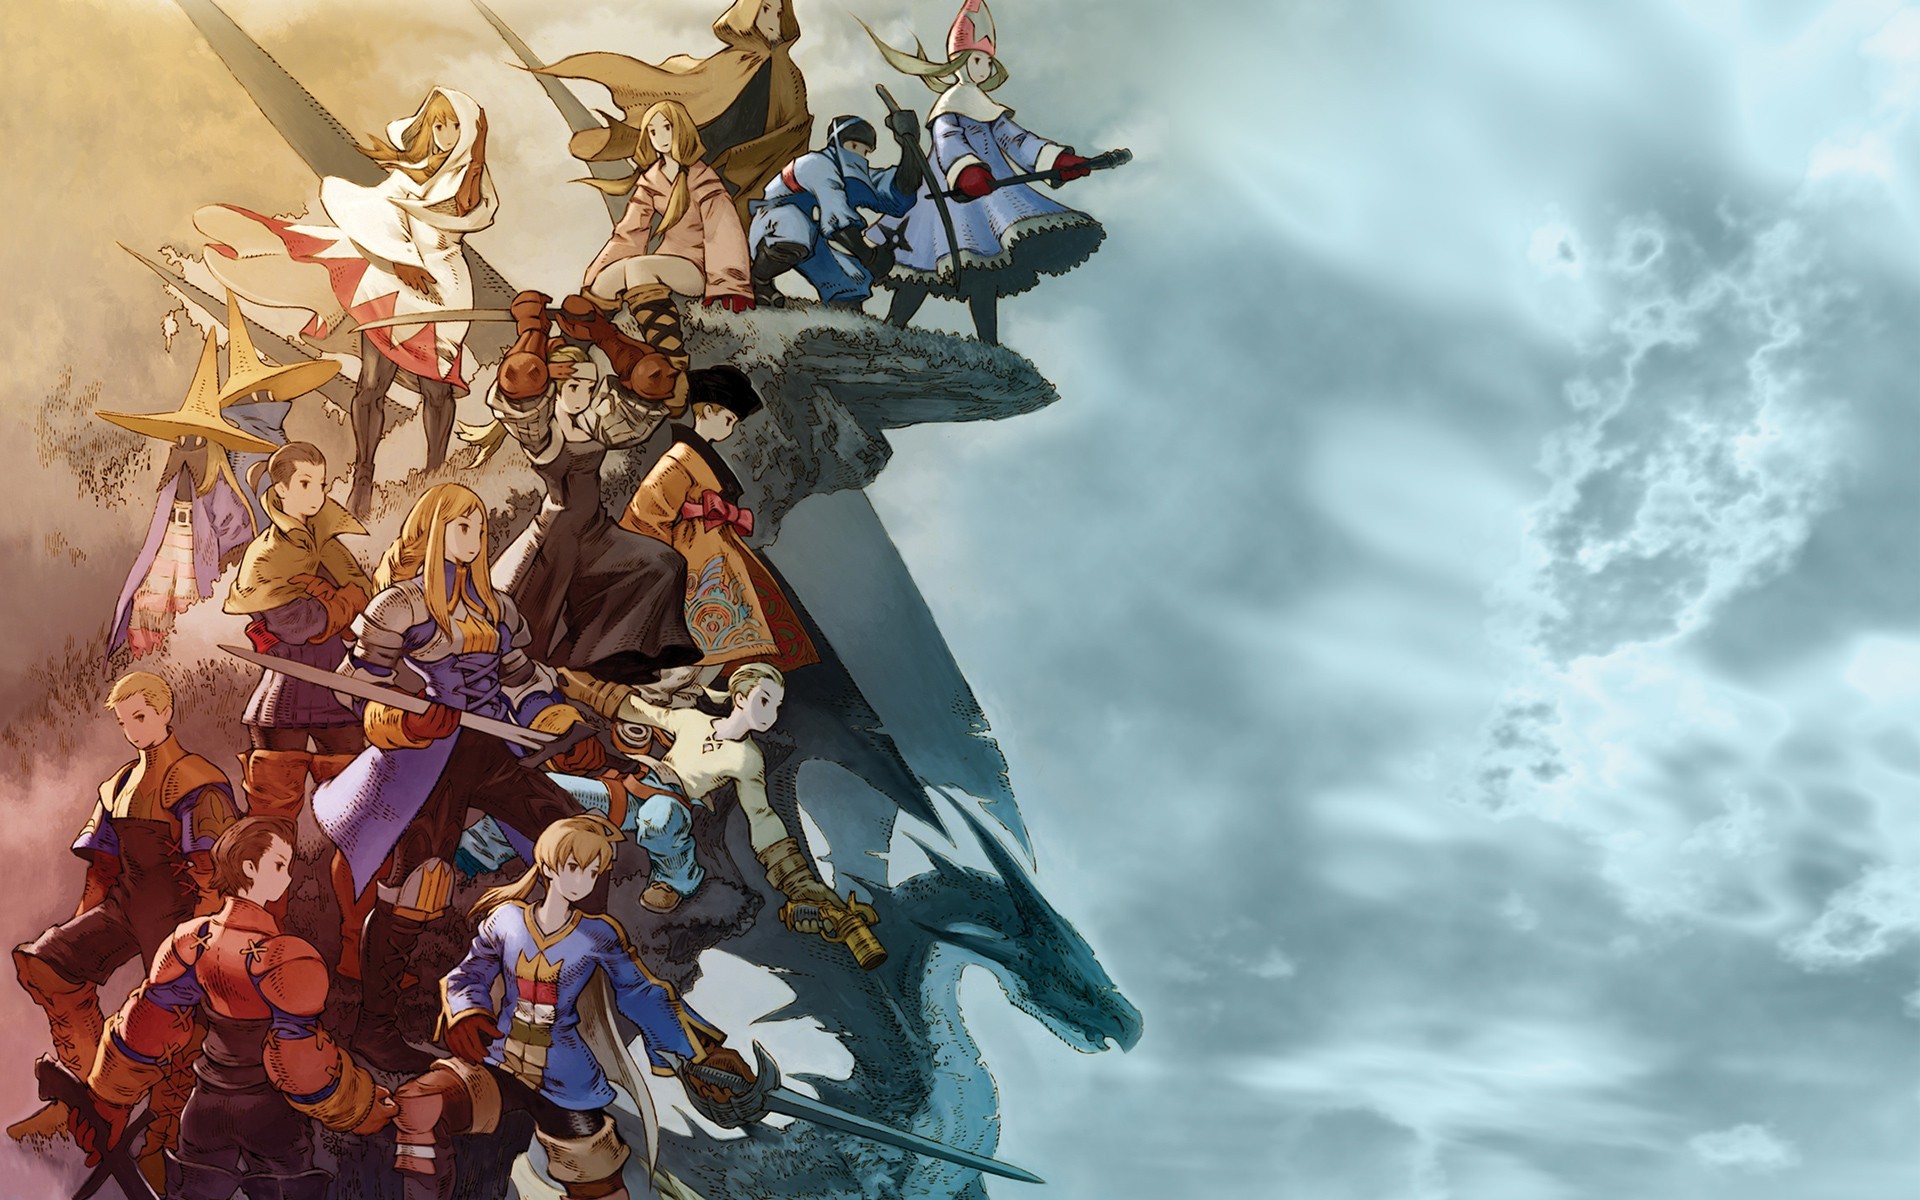 Classic Srpg Final Fantasy Tactics Arrives On Android Mobilesyrup